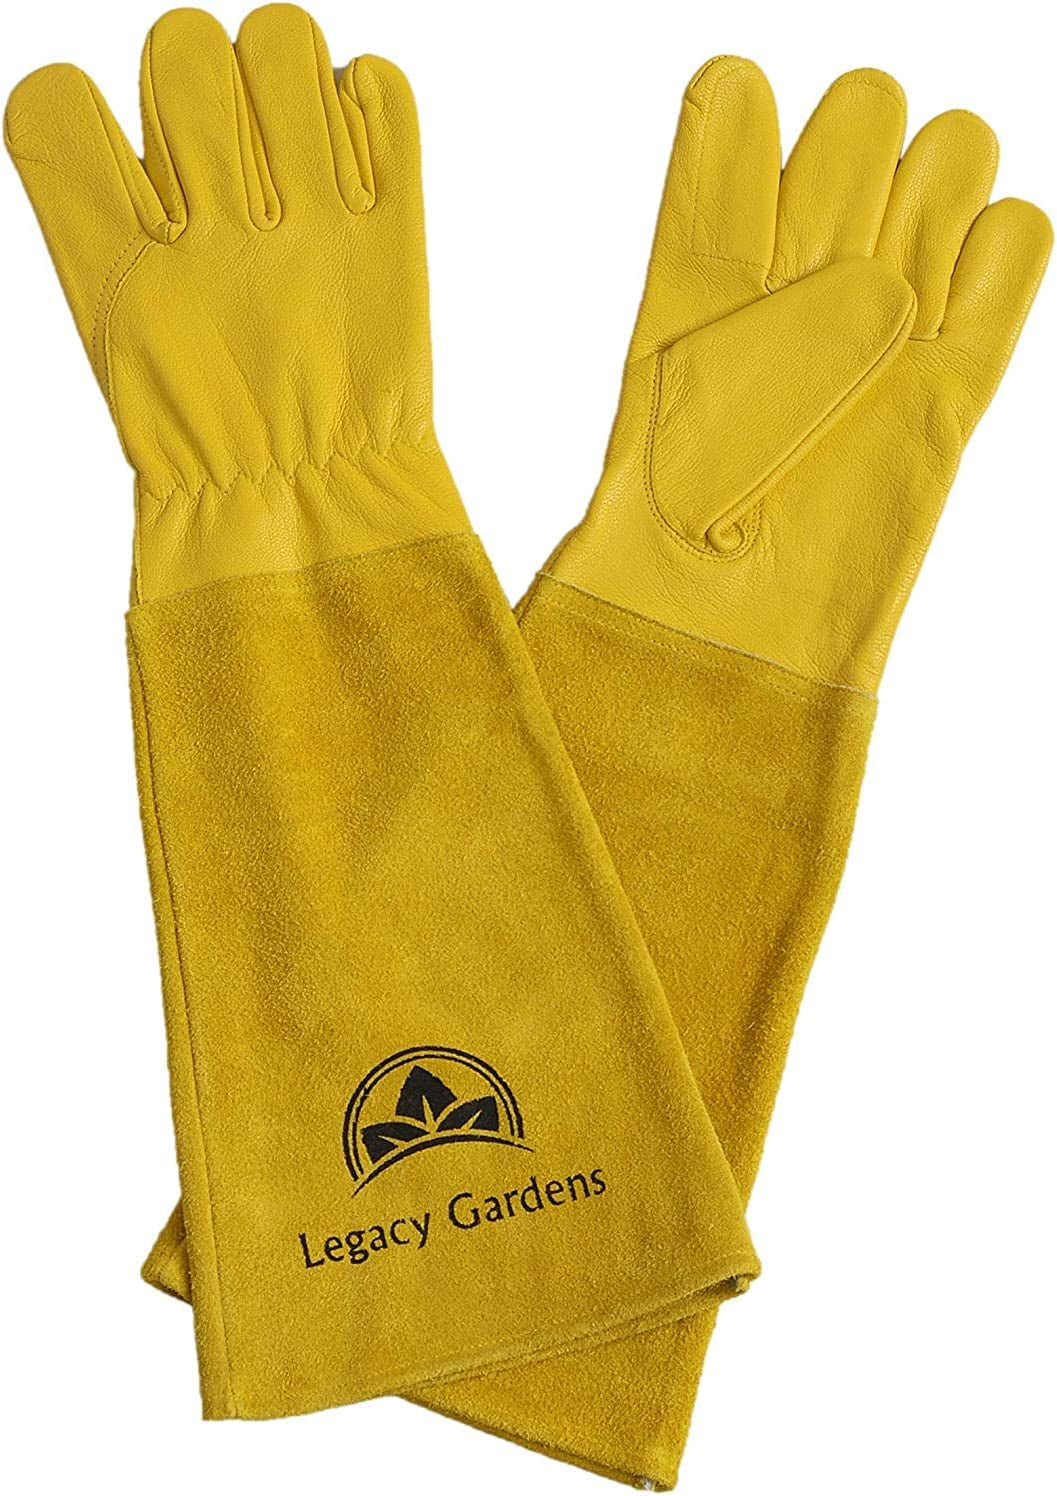 Legacy Gardens, Legacy Gardens Rose Pruning Gardening Leather Gloves with Long Leather Forearm